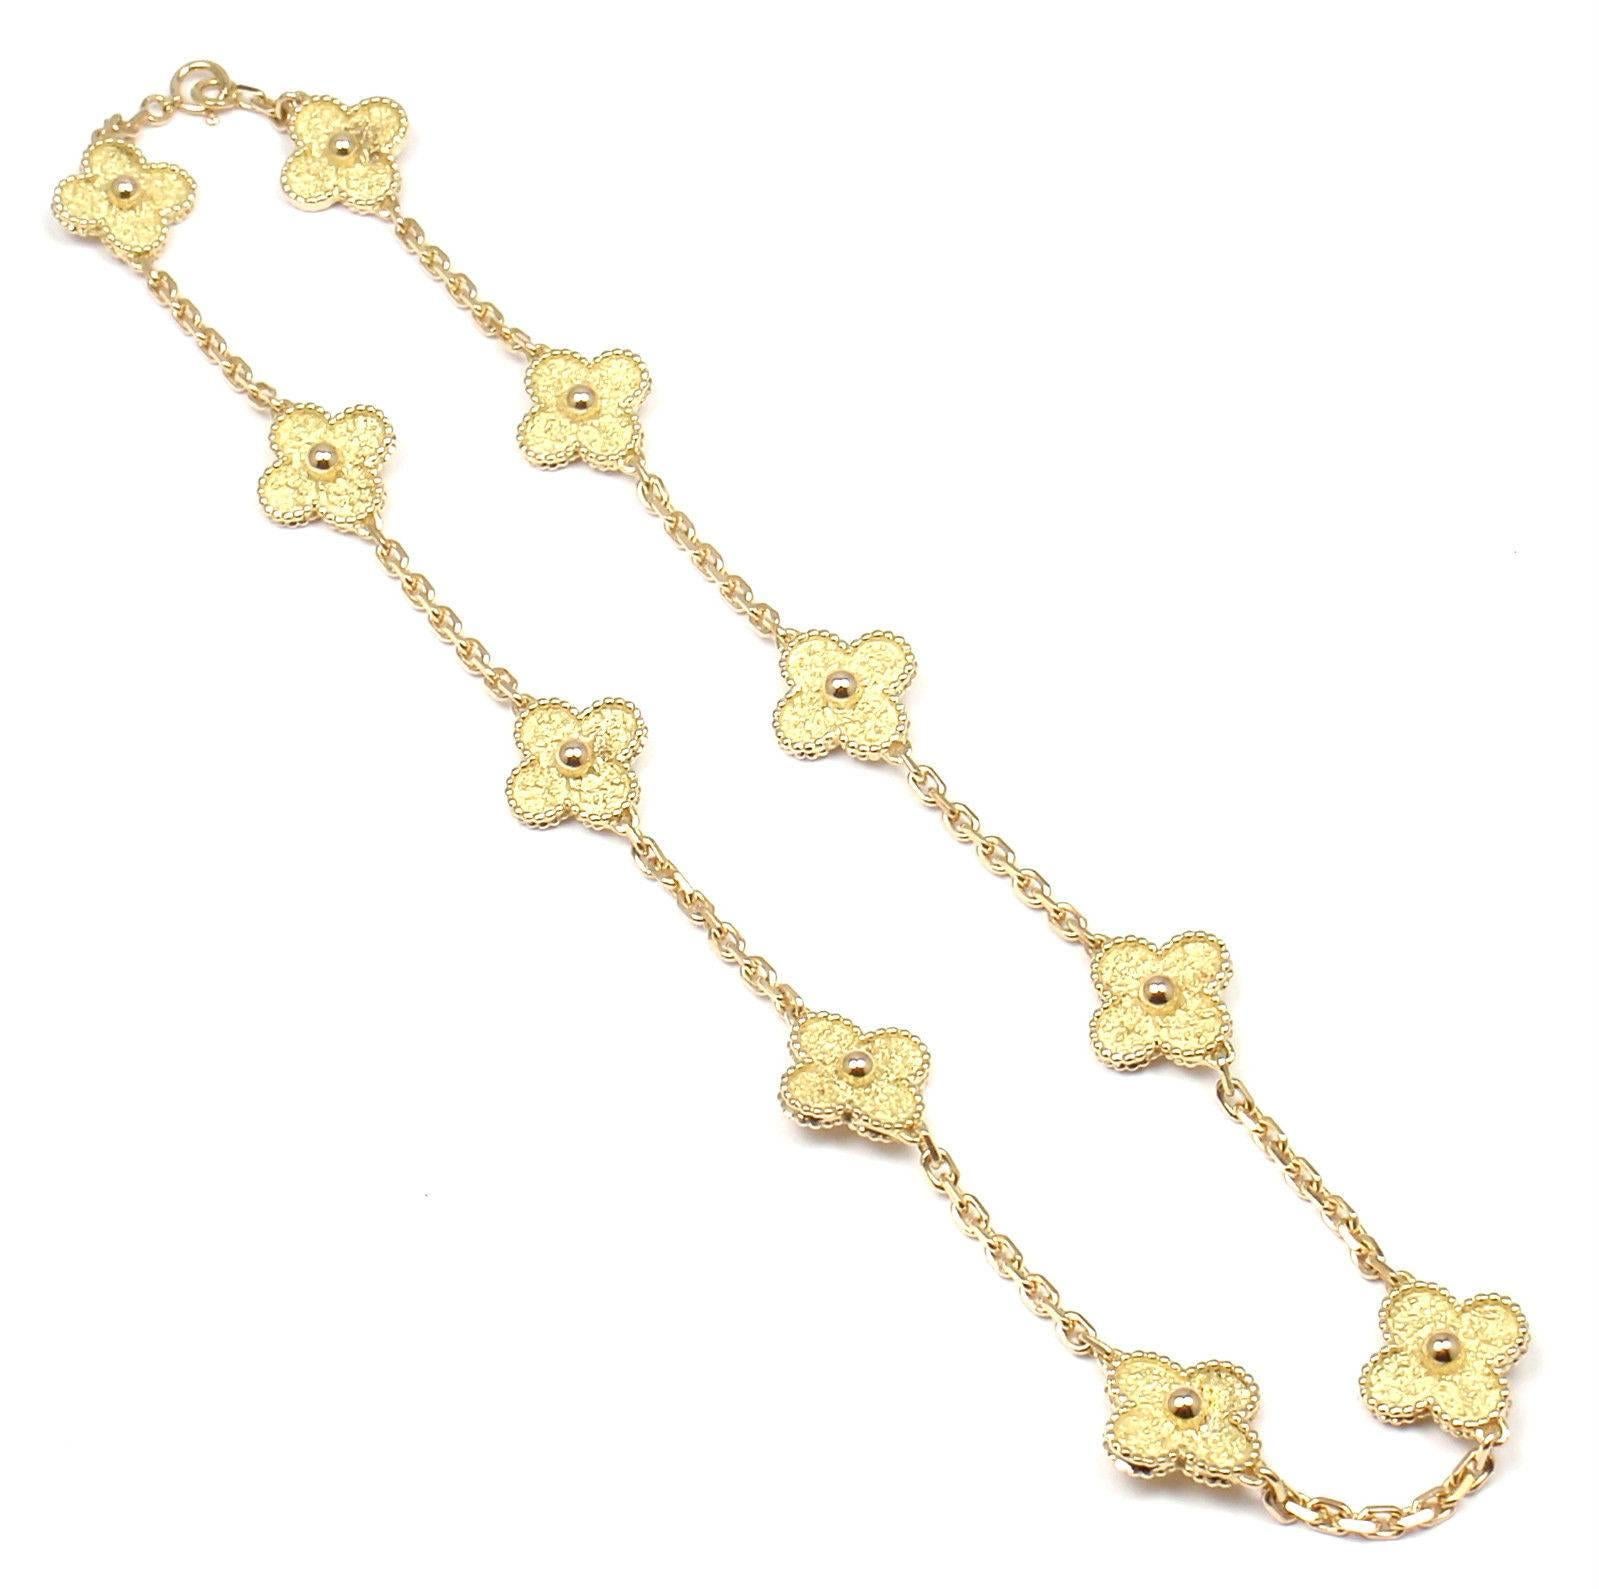 18k Yellow Gold Vintage Alhambra 10 Motif Necklace by Van Cleef & Arpels.
With 10 motifs of gold alhambra 15mm each
This necklace comes with service paper from Van Cleef & Arpels store.

Details:
Length: 15.5